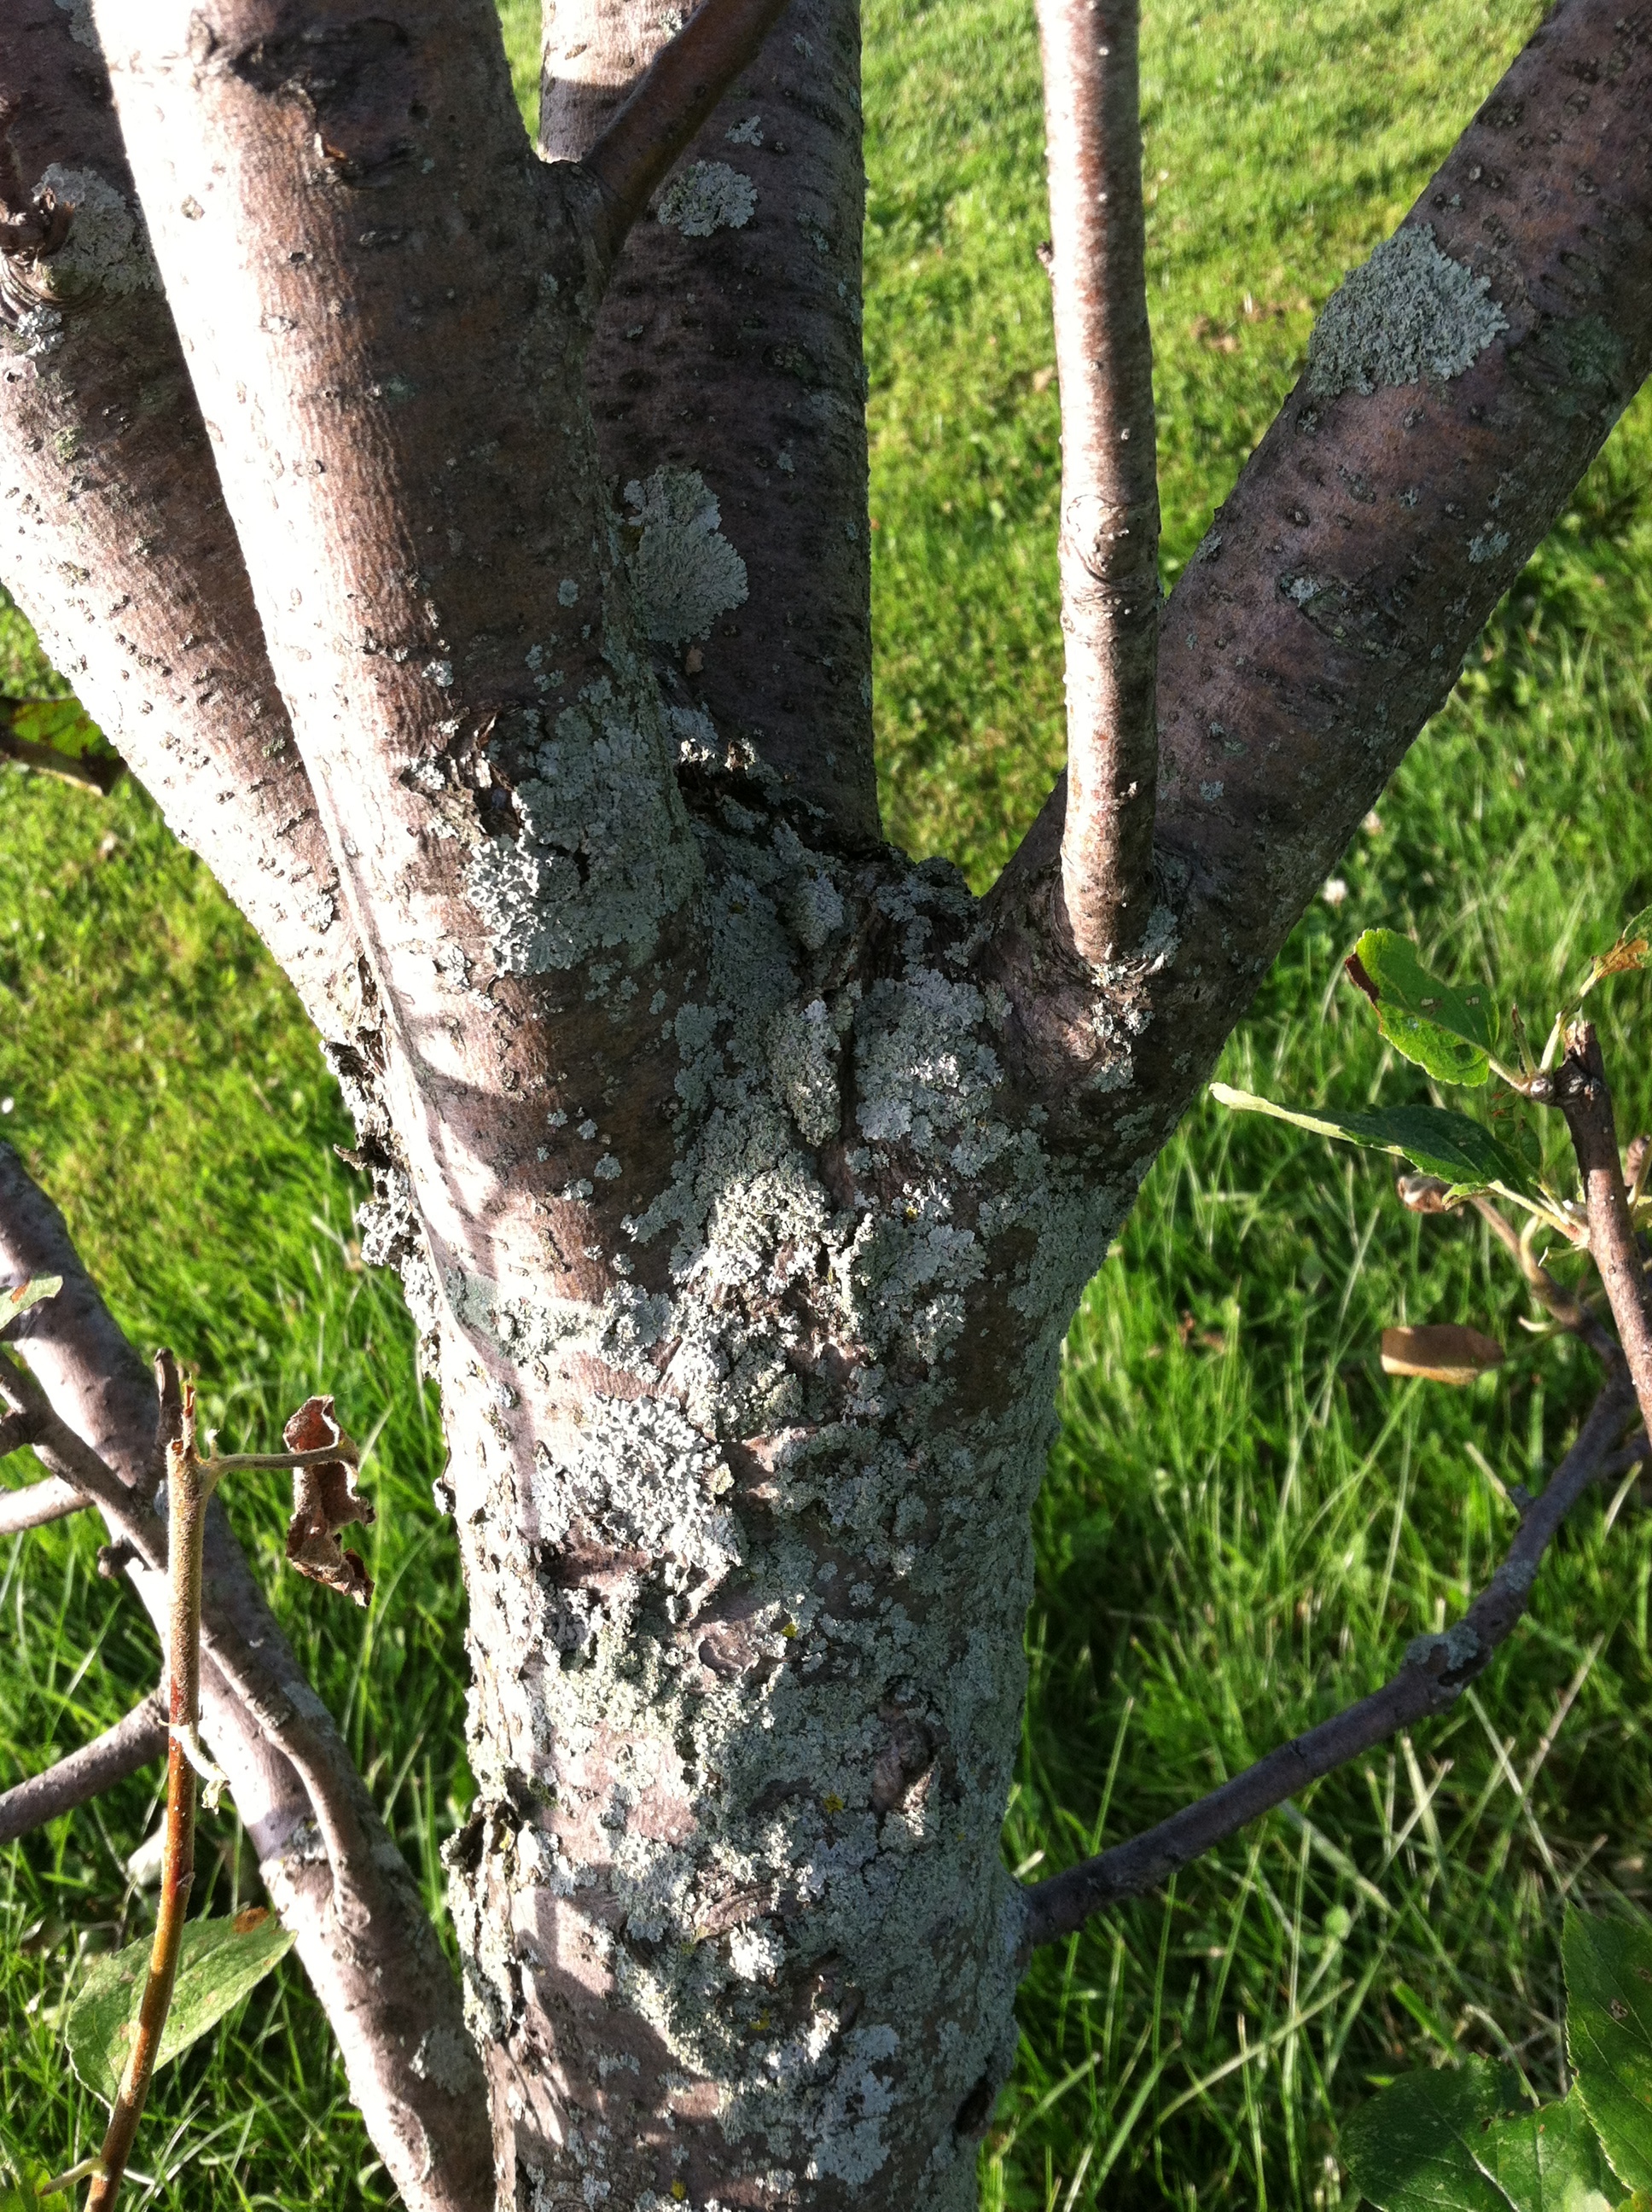 What can I do about this mold on my trees and shrubs? - Ask an Expert